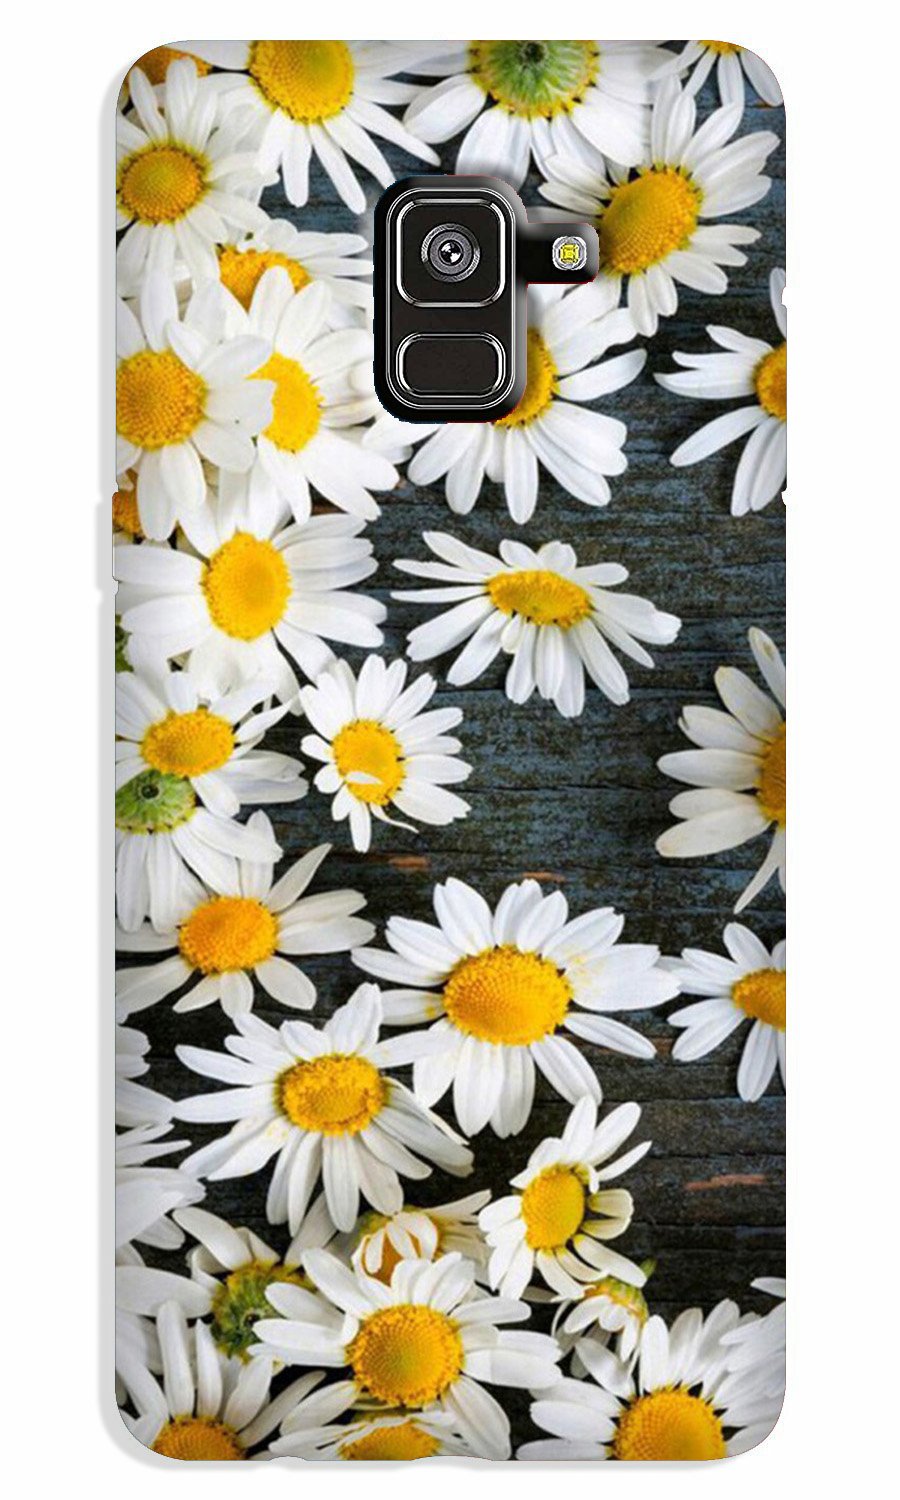 White flowers2 Case for Galaxy A8 Plus